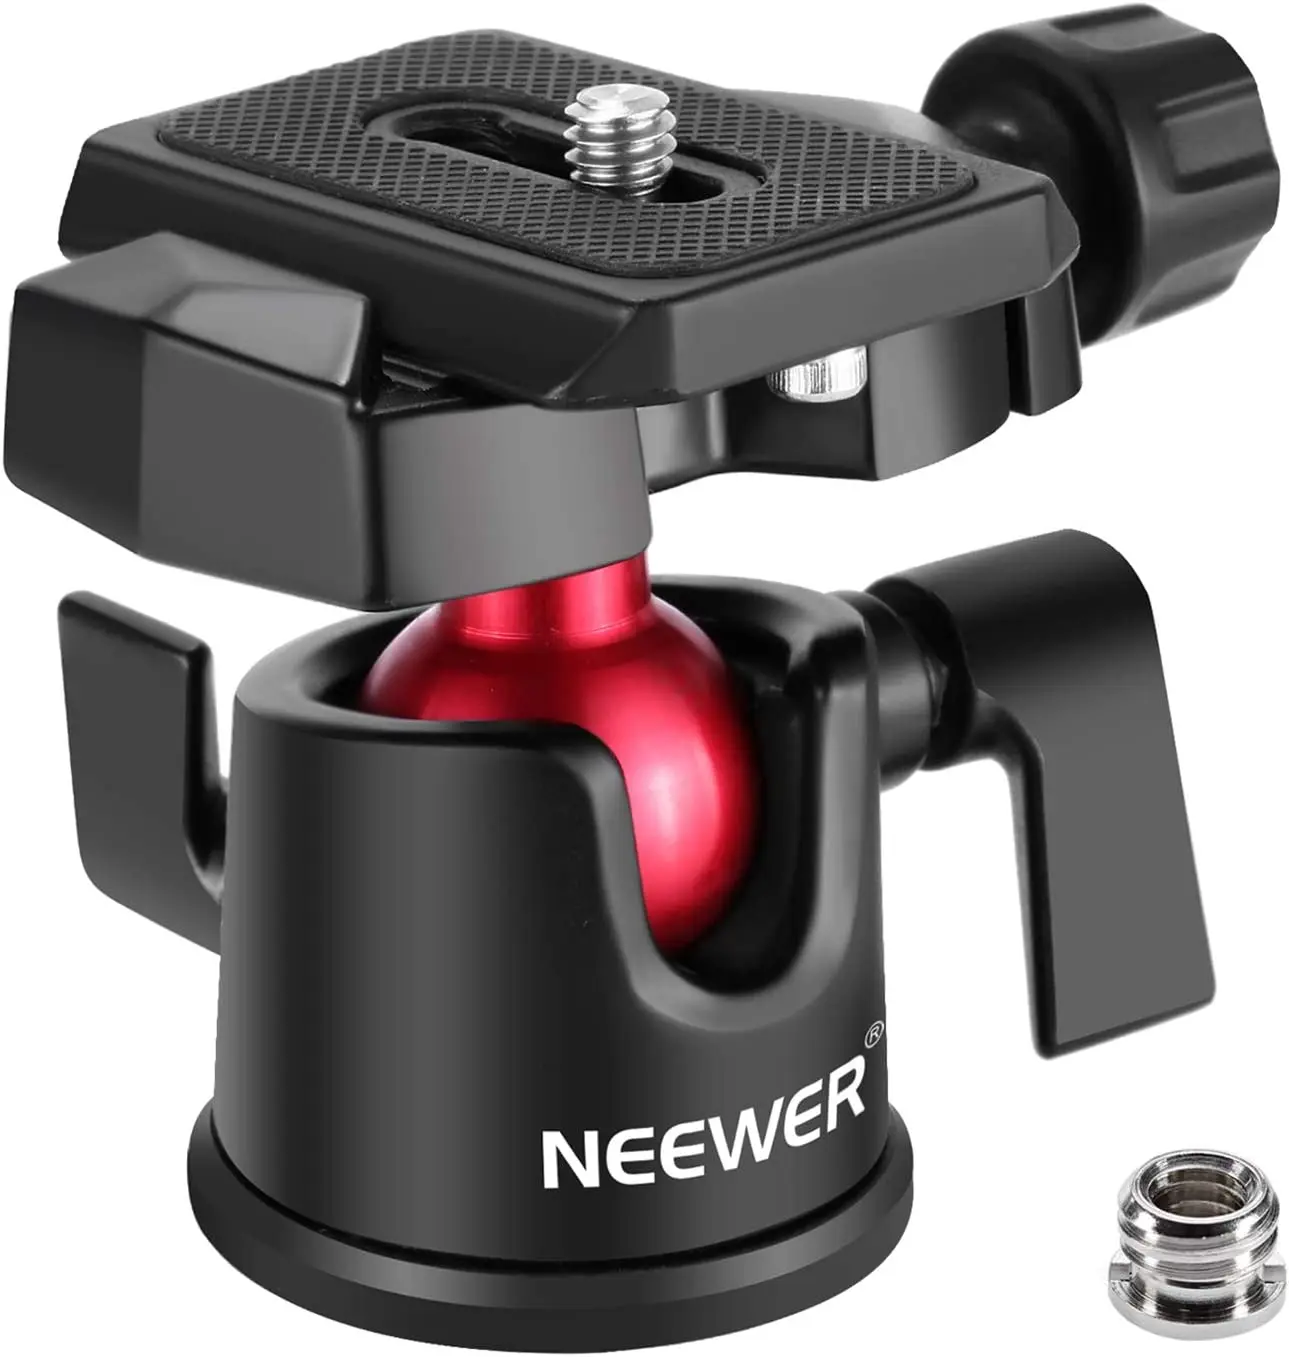 

NEEWER Camera Tripod Head Ball Head 360° Rotating Panoramic with 1/4" Arca Type Quick Plate and Bubble Level for DSLR Camera